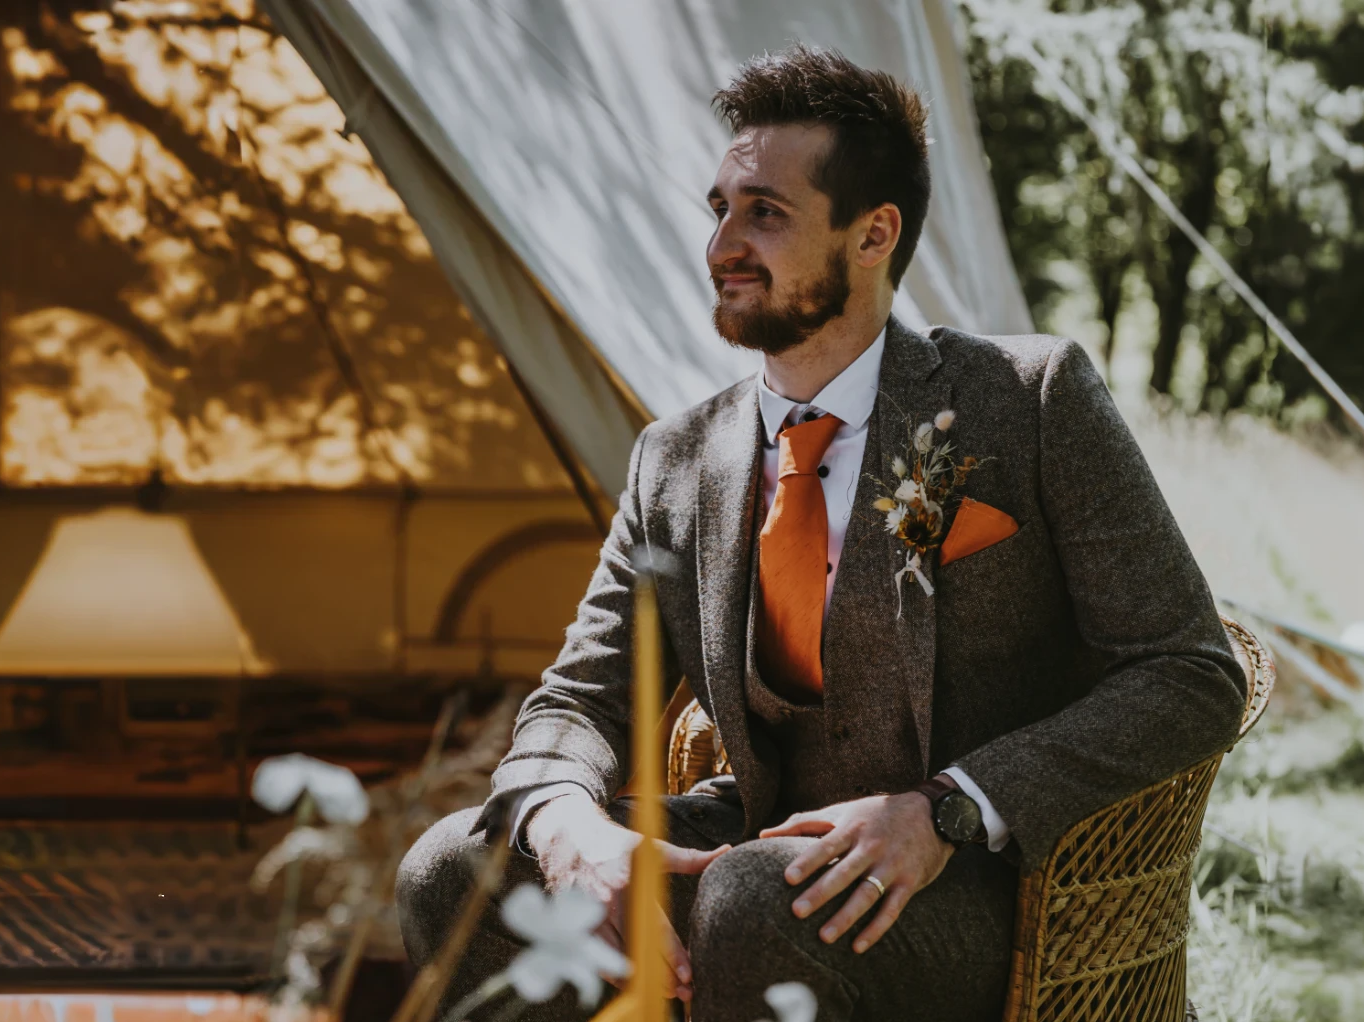 White groom seated outside in front of a teepee, wearing and orange tie